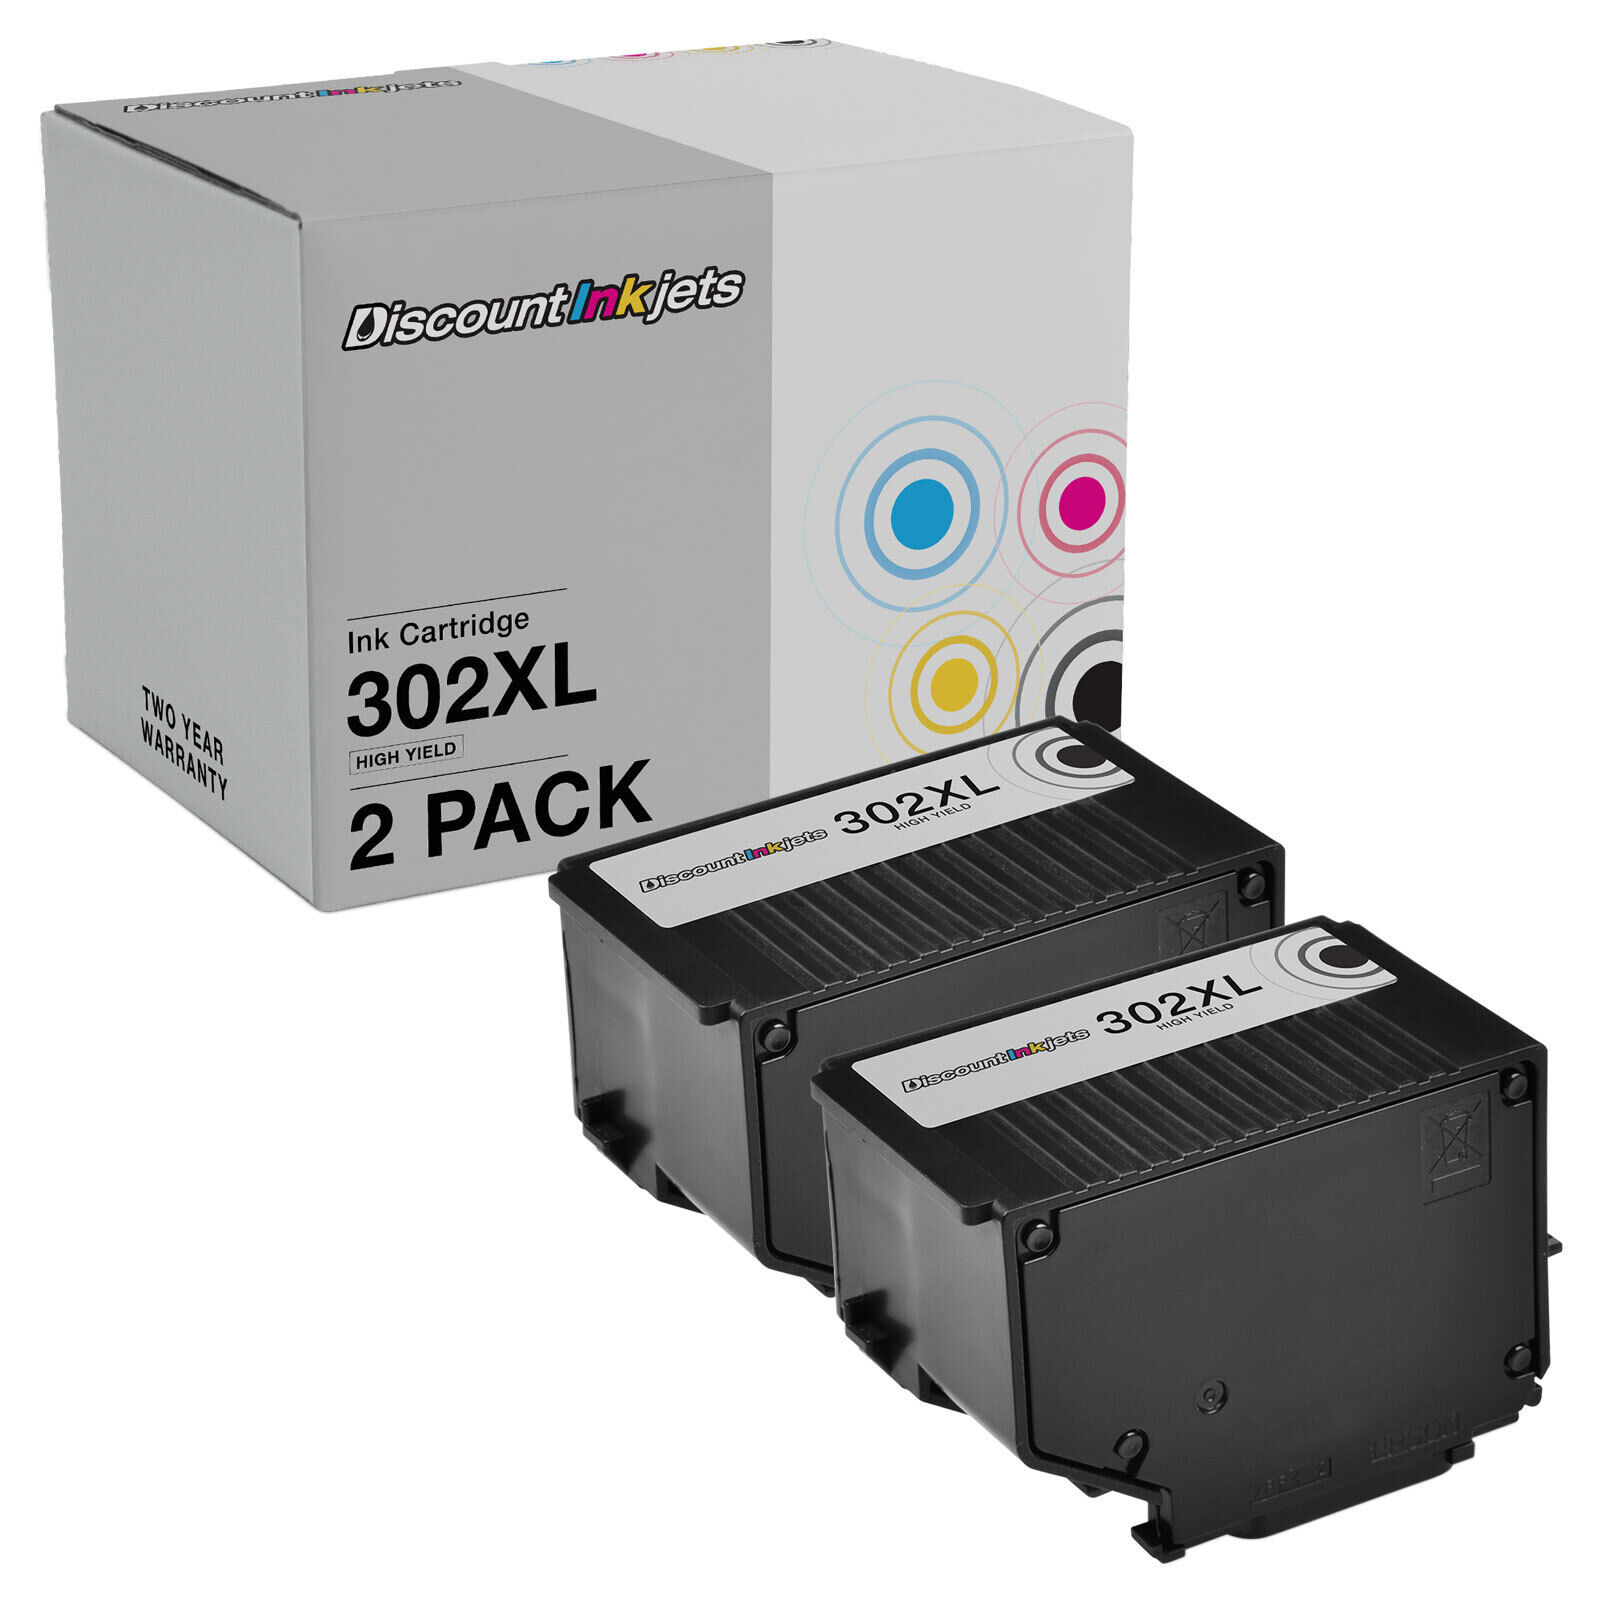 Ink Cartridge Replacements for Epson 302XL T302XL020 HY (Black, 2-Pack)